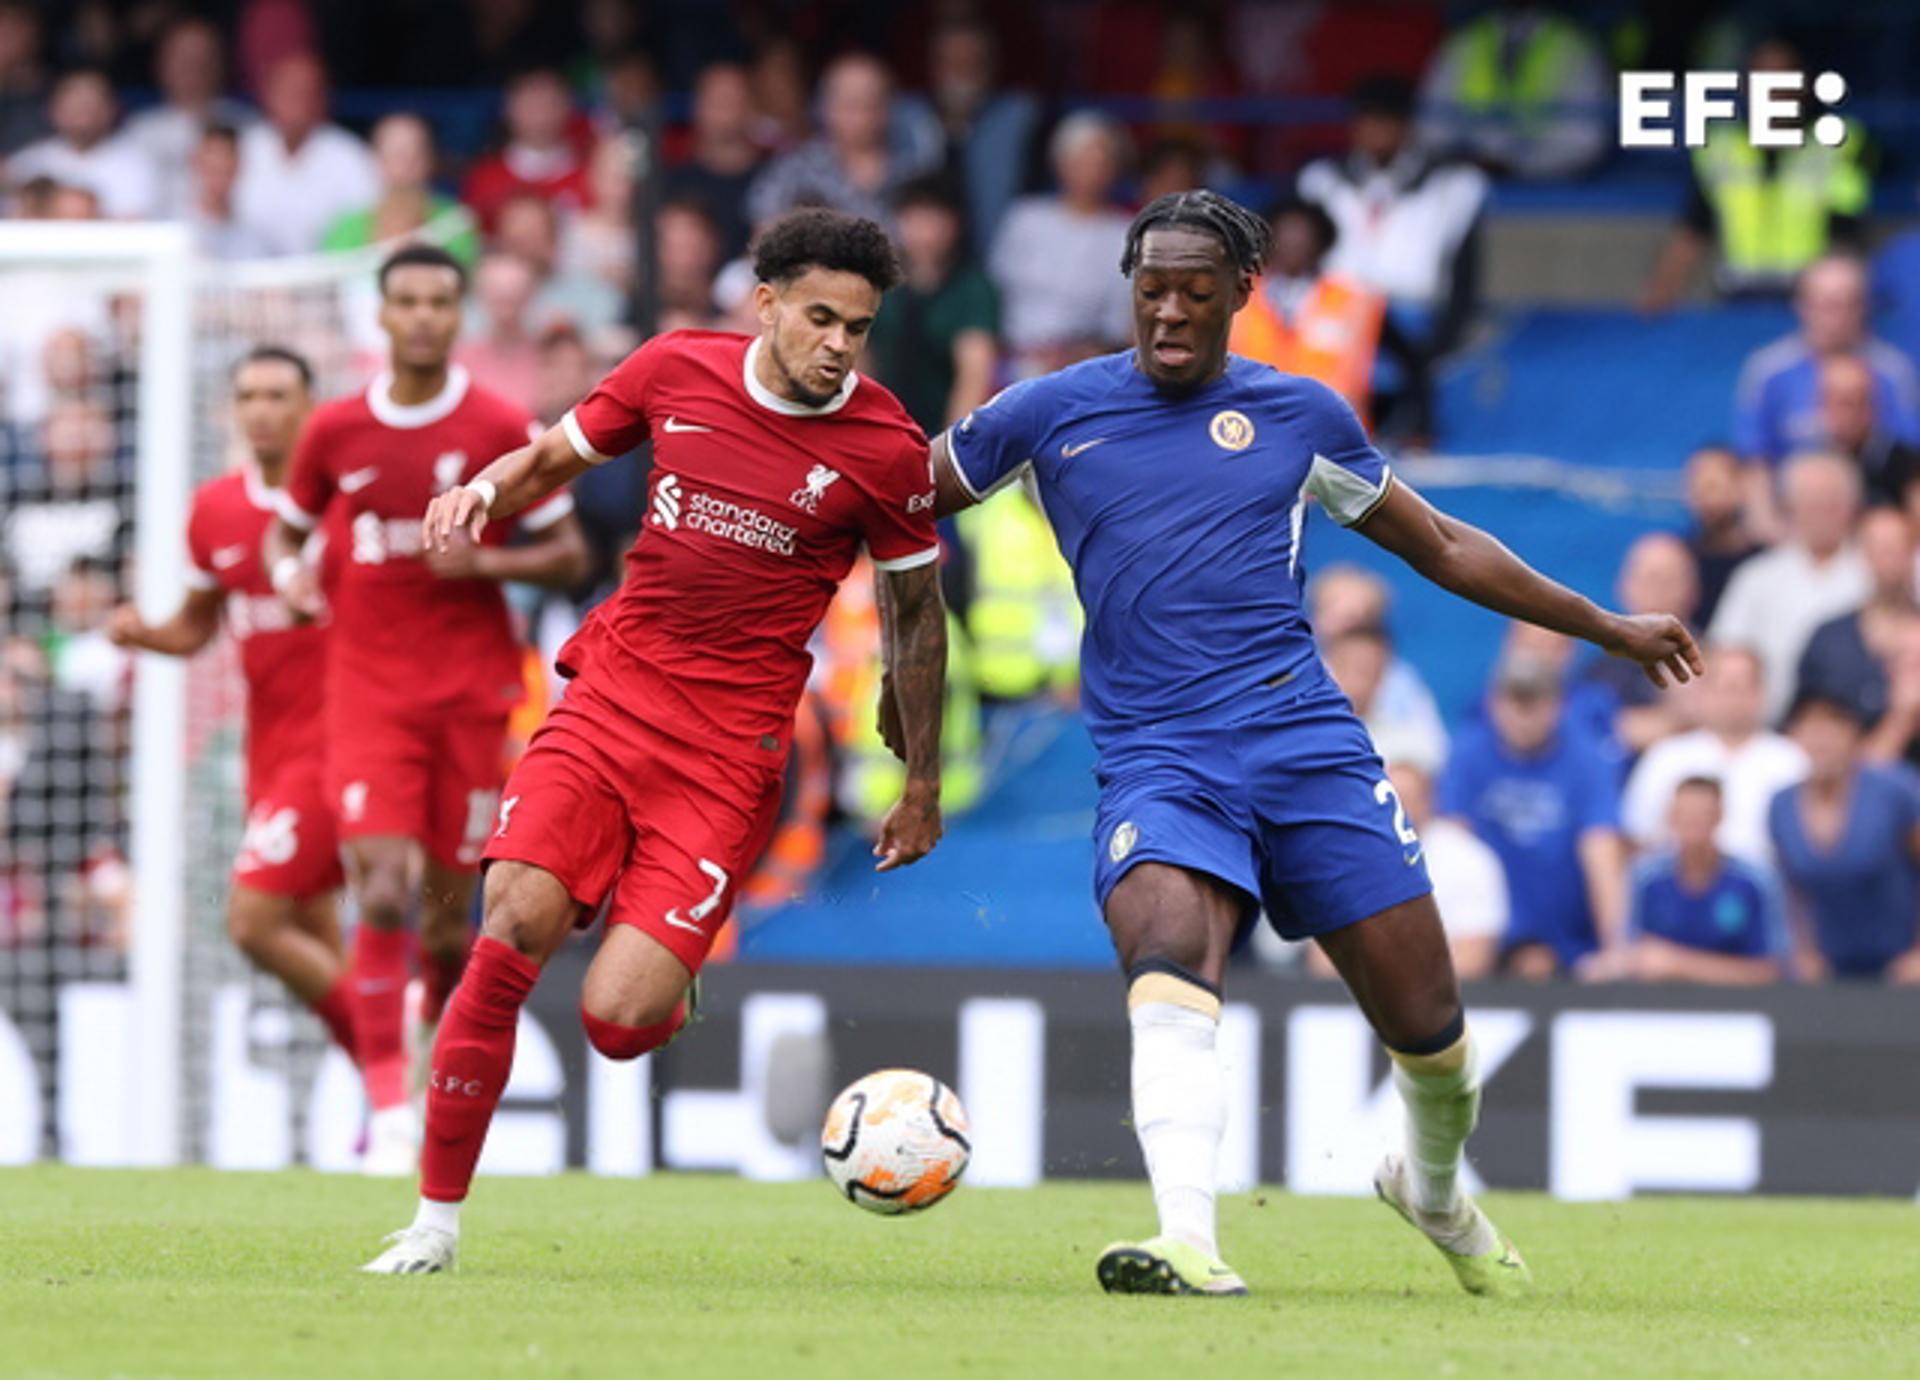 Liverpool's Luis Diaz (L) and Chelsea's Alex Disasi vie for the ball during the Premier League match in London on 13 August 2023. EFE/EPA/NEIL HALL EDITORIAL USE ONLY. No use with unauthorized audio, video, data, fixture lists, club/league logos or 'live' services. Online in-match use limited to 120 images, no video emulation. No use in betting, games or single club/league/player publications